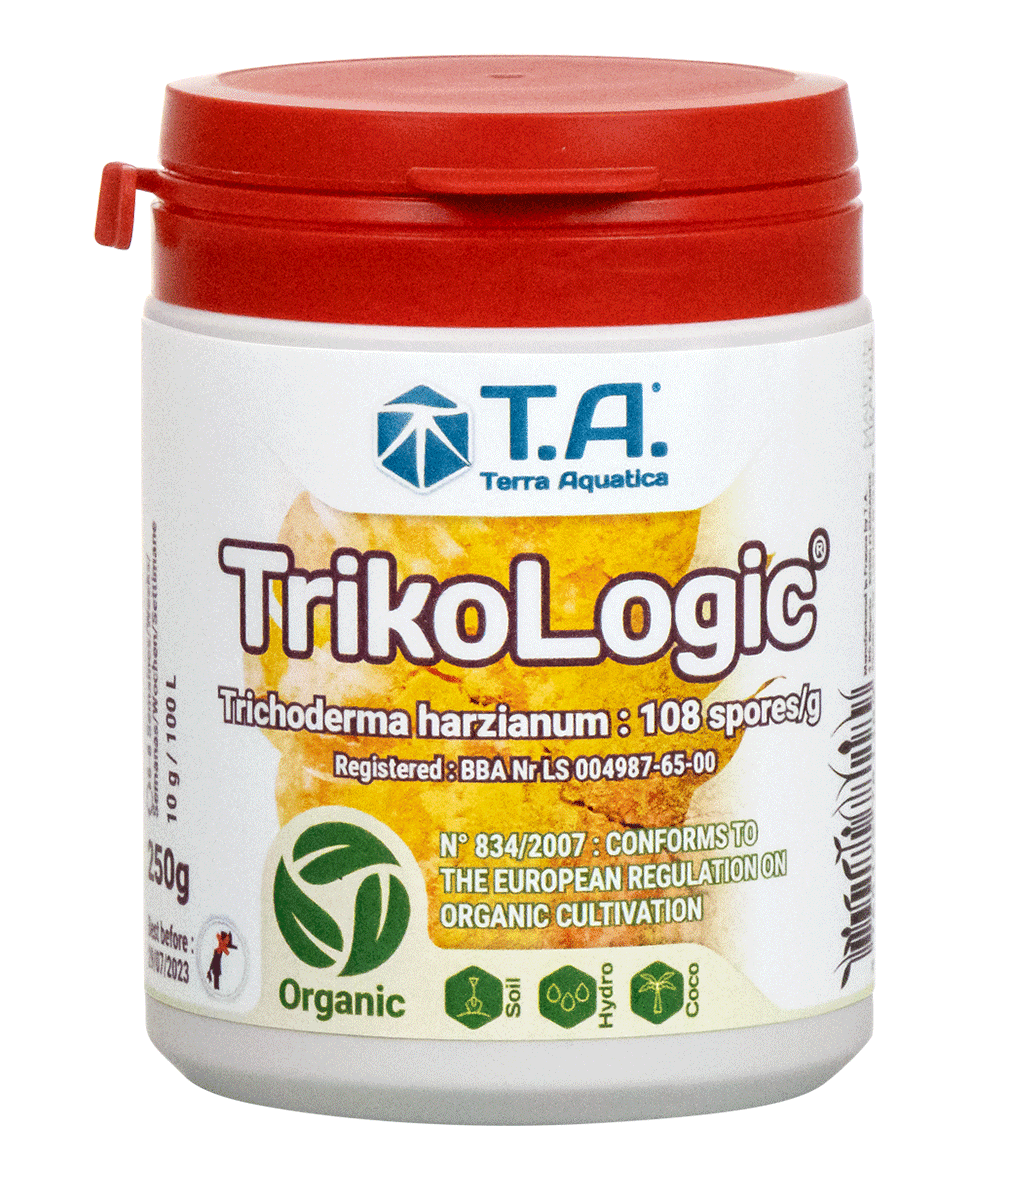 Have anyone used ta trikologic and is it any good